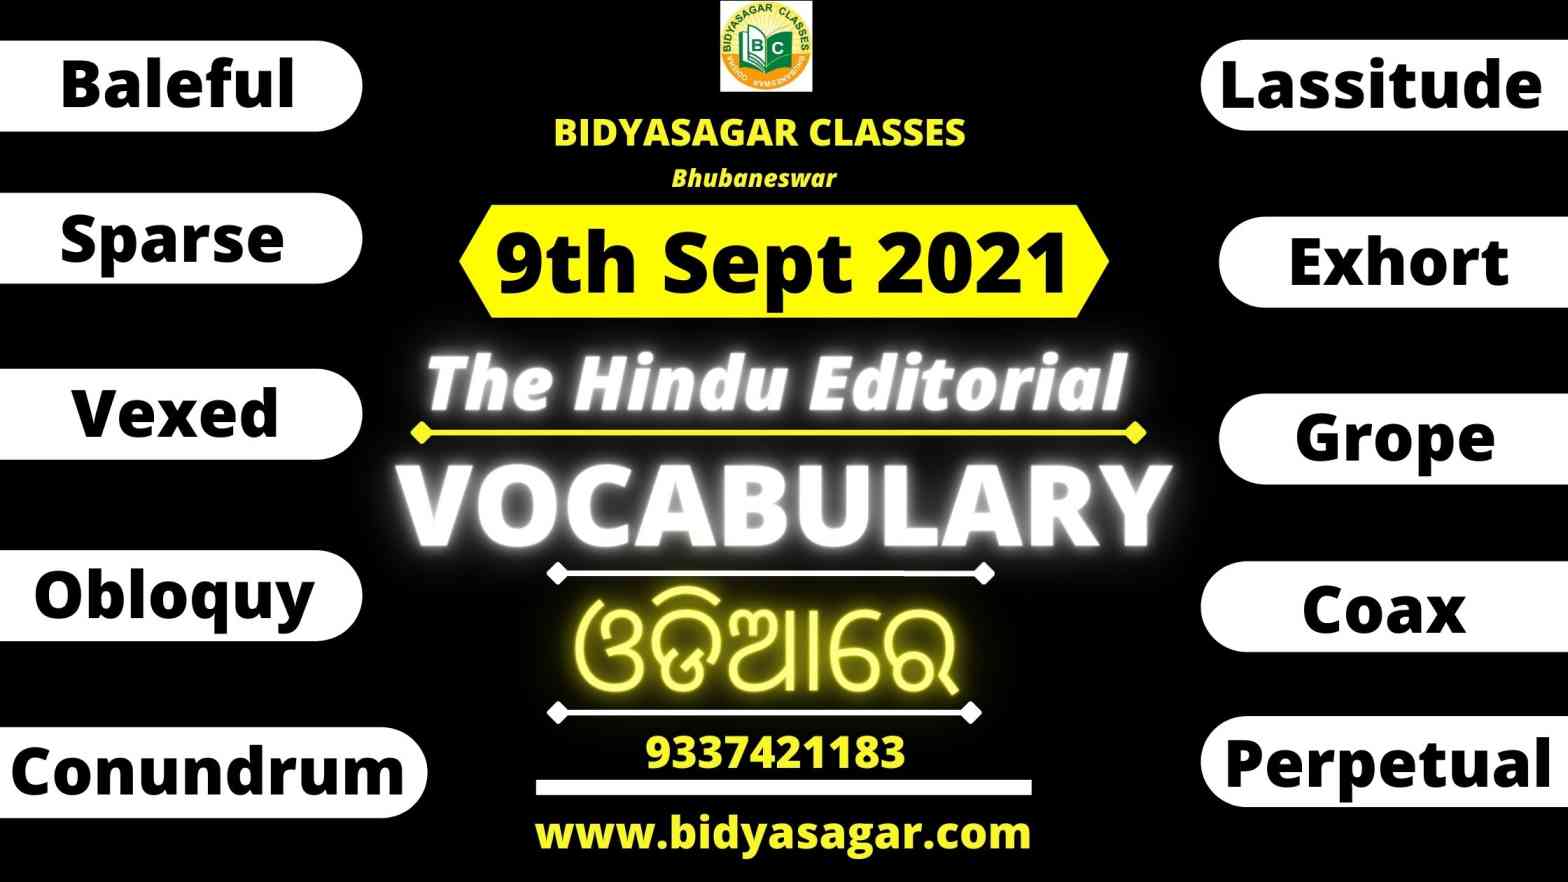 The Hindu Editorial Vocabulary of 9th September 2021